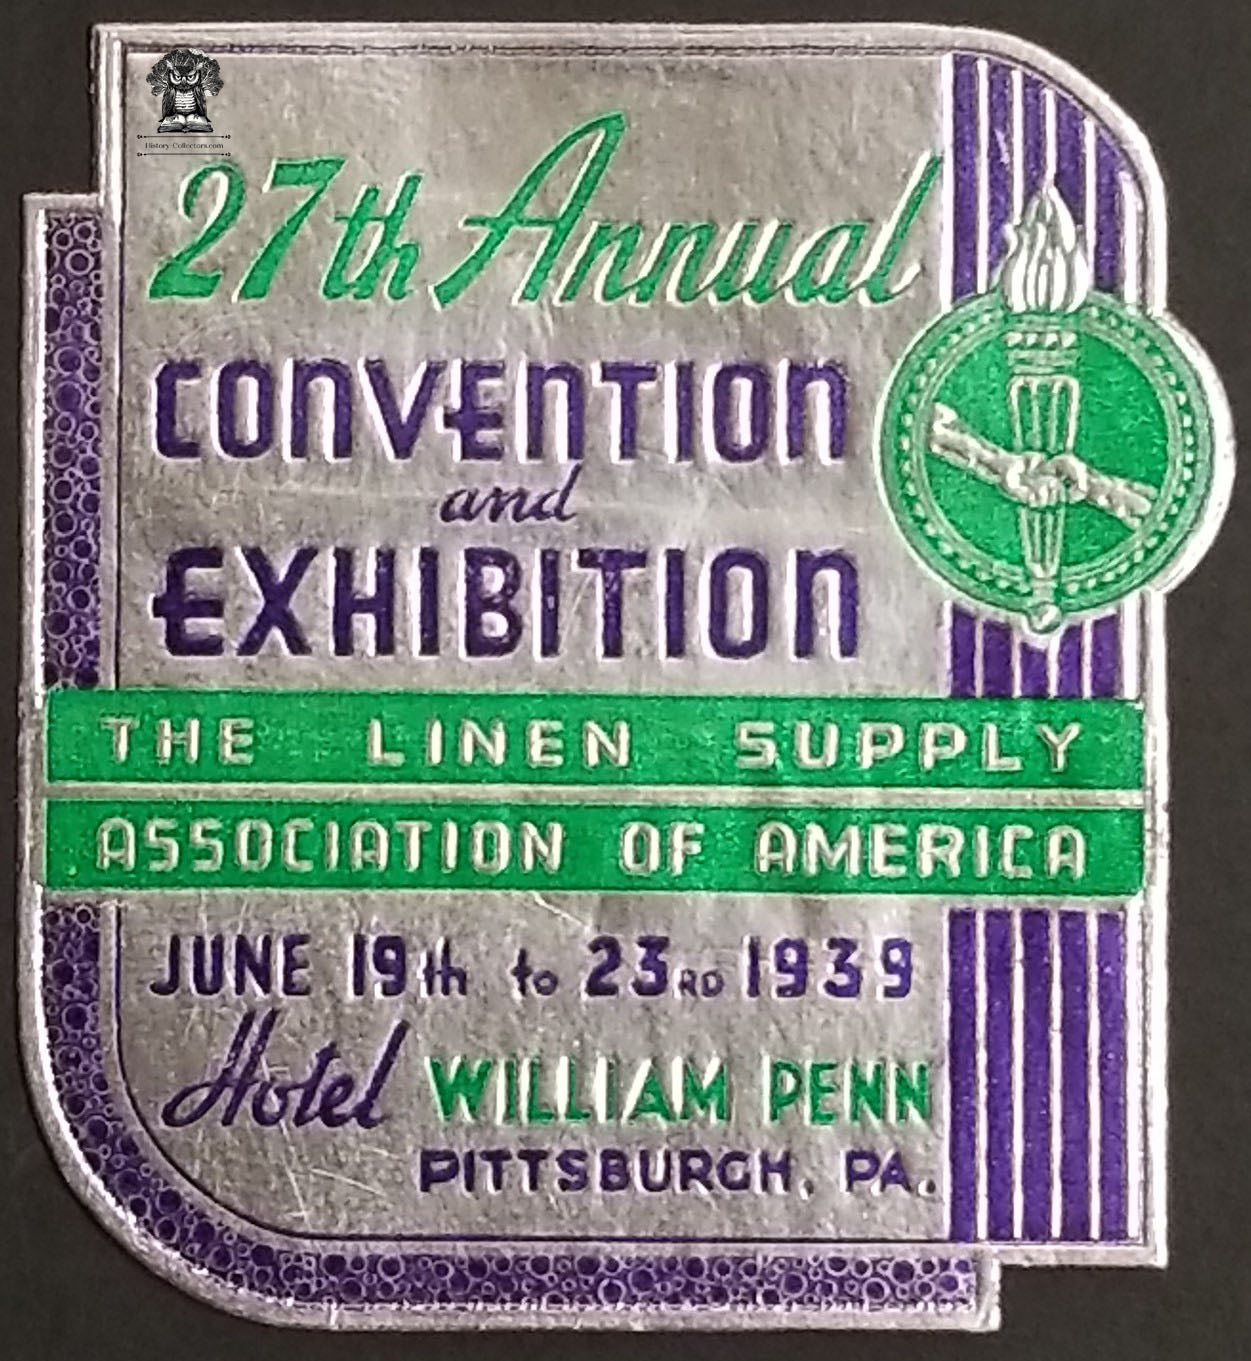 1939 Linen Supply Association Convention Exhibition Advertising Seal - Hotel William Penn Pittsburgh PA